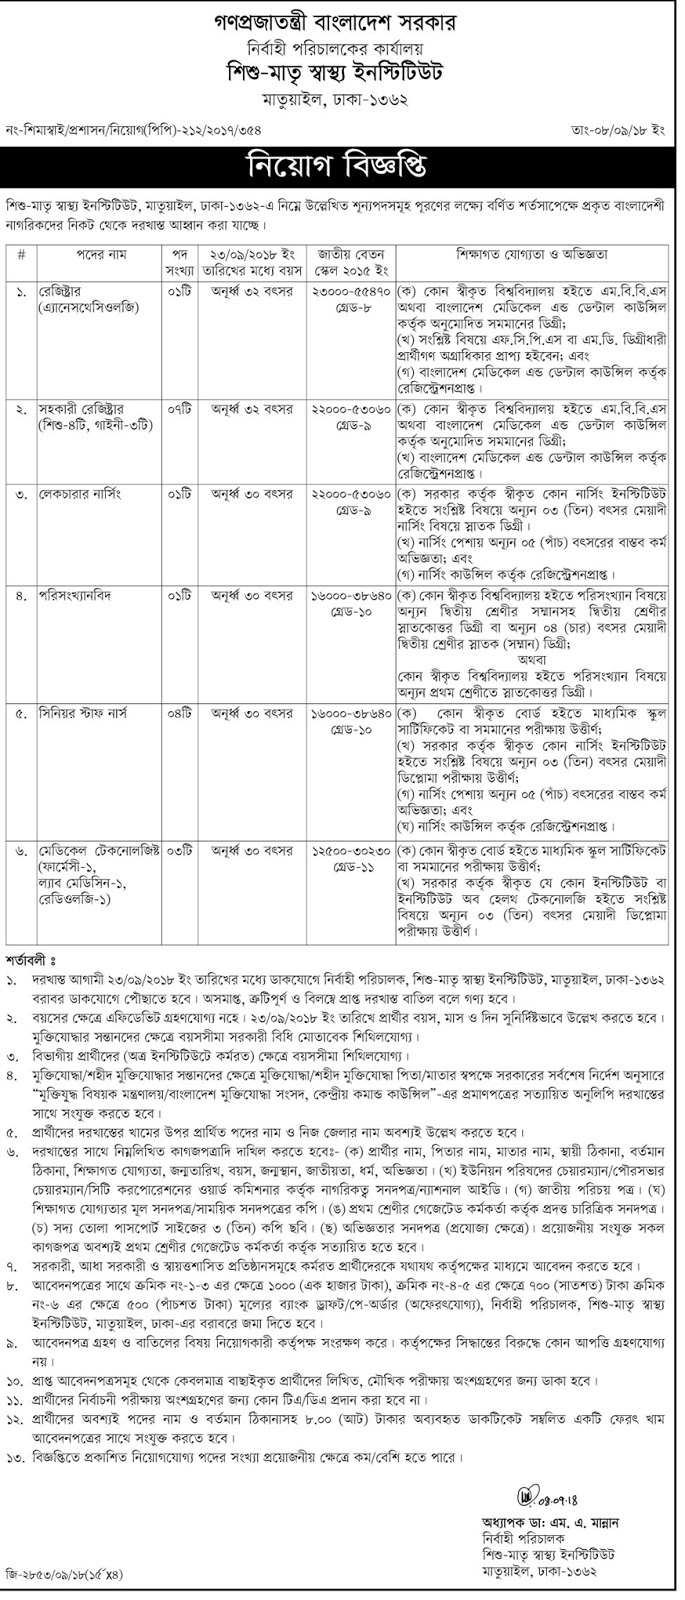 Institute of Child and Mother Health (ICMH) Job Circular 2018